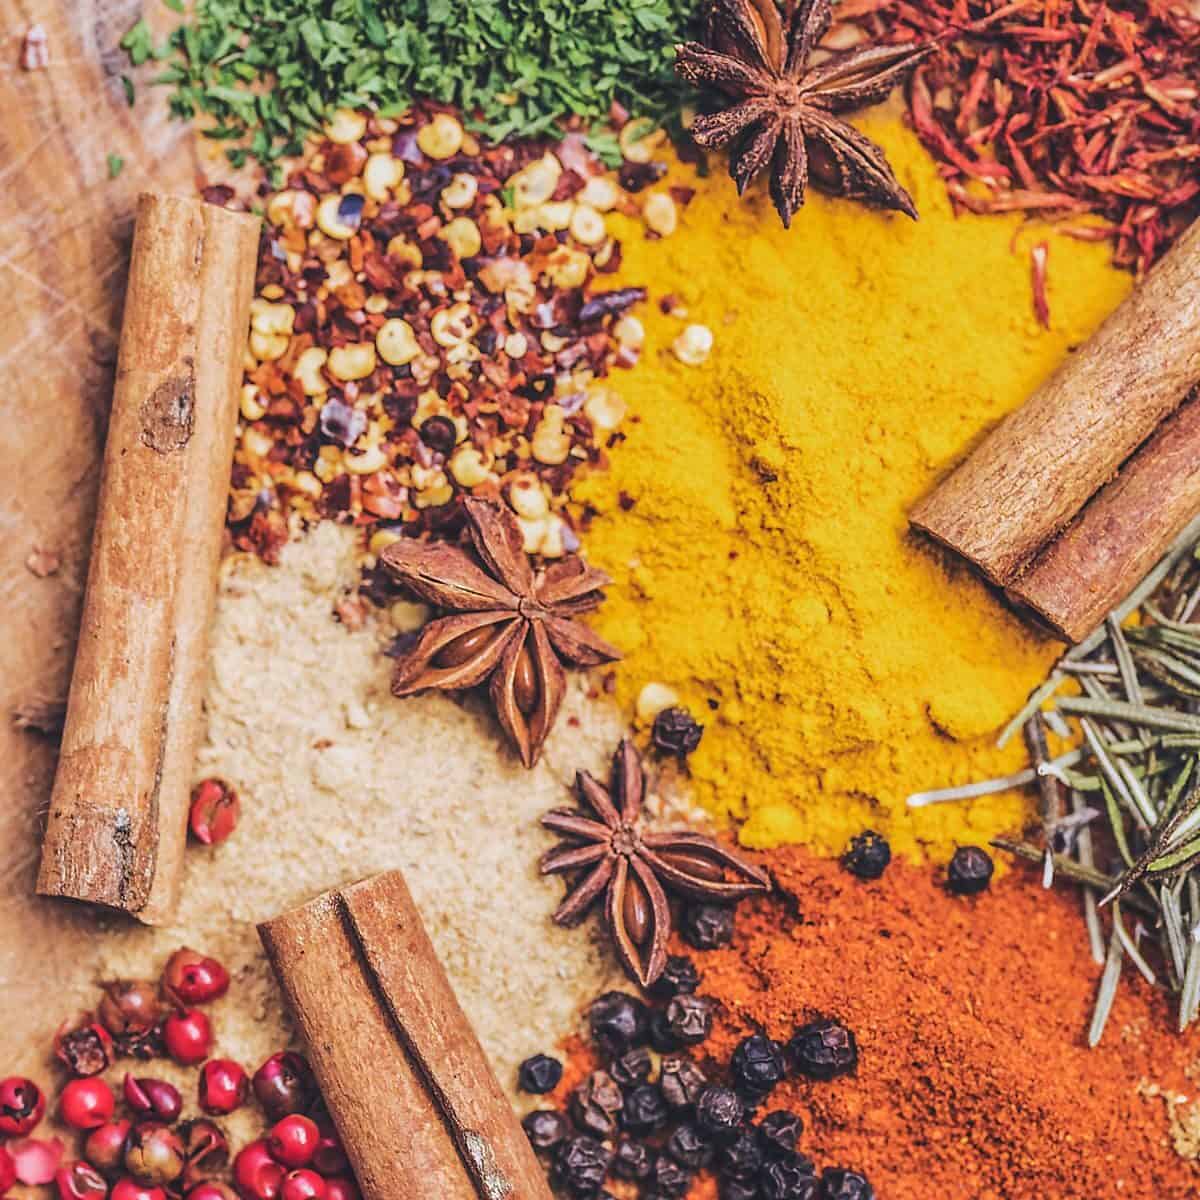 Picture of herbs and spices, both are powerful antioxidants.